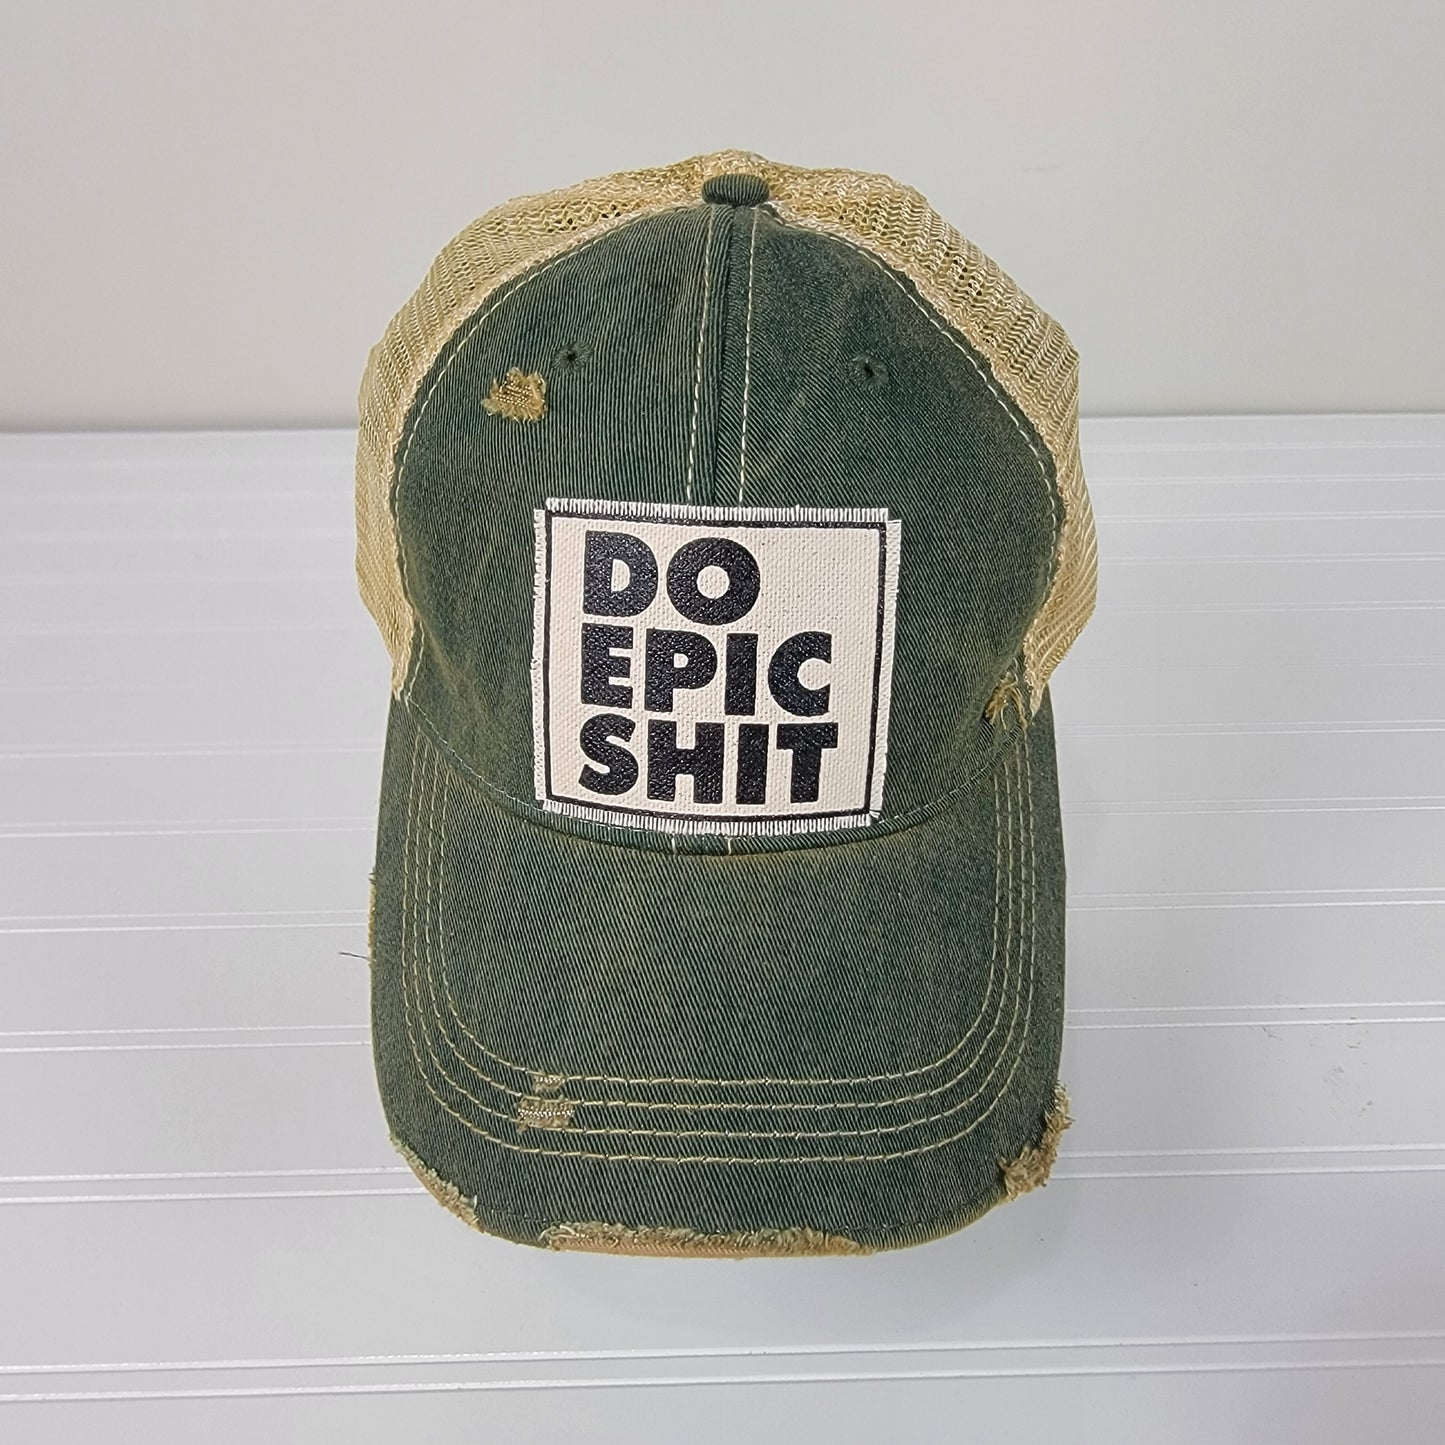 Distressed Vintage Patch Caps - Assorted Designs